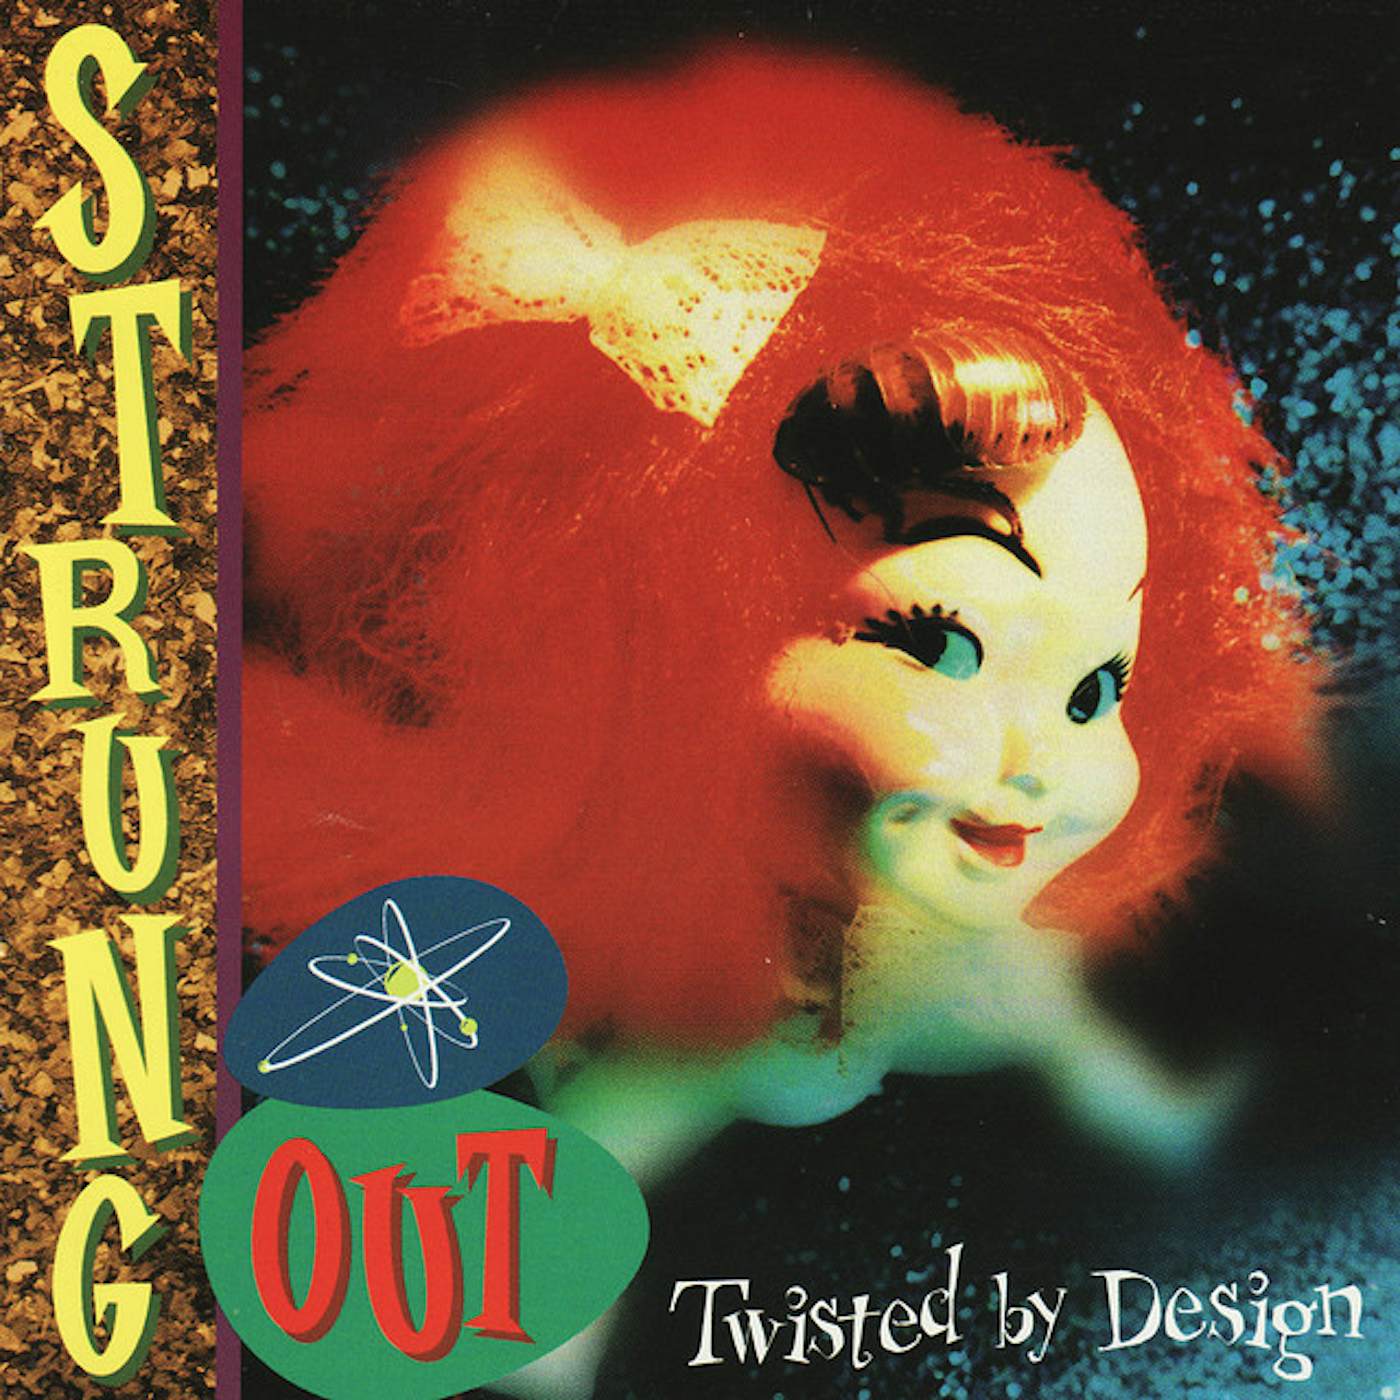 Strung Out TWISTED BY DESIGN CD